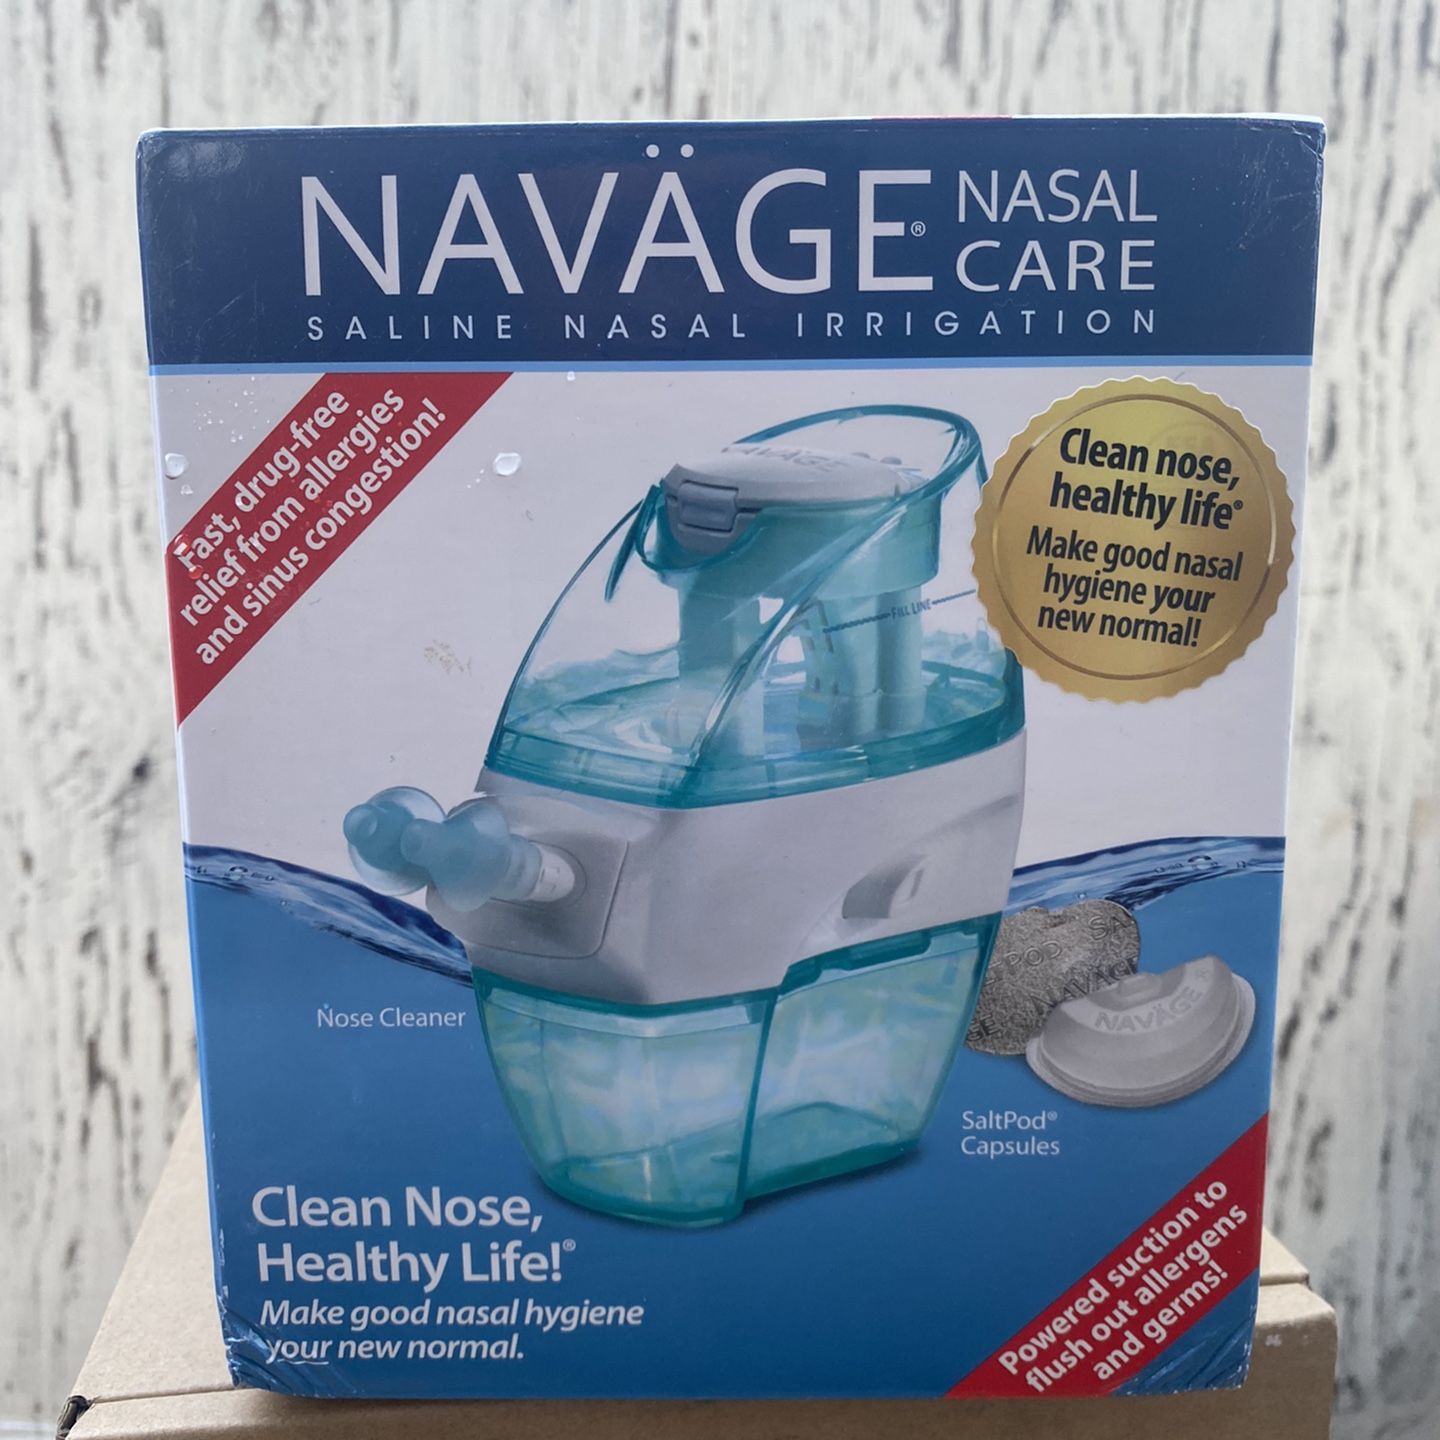 Navage Nasal Care MULTI-USER Bonus Pack: Navage Nose Cleaner, 20 Salt Pods,  Plus a Second Nasal Dock (in Teal) and an Extra Pair of Nose Pillows. 